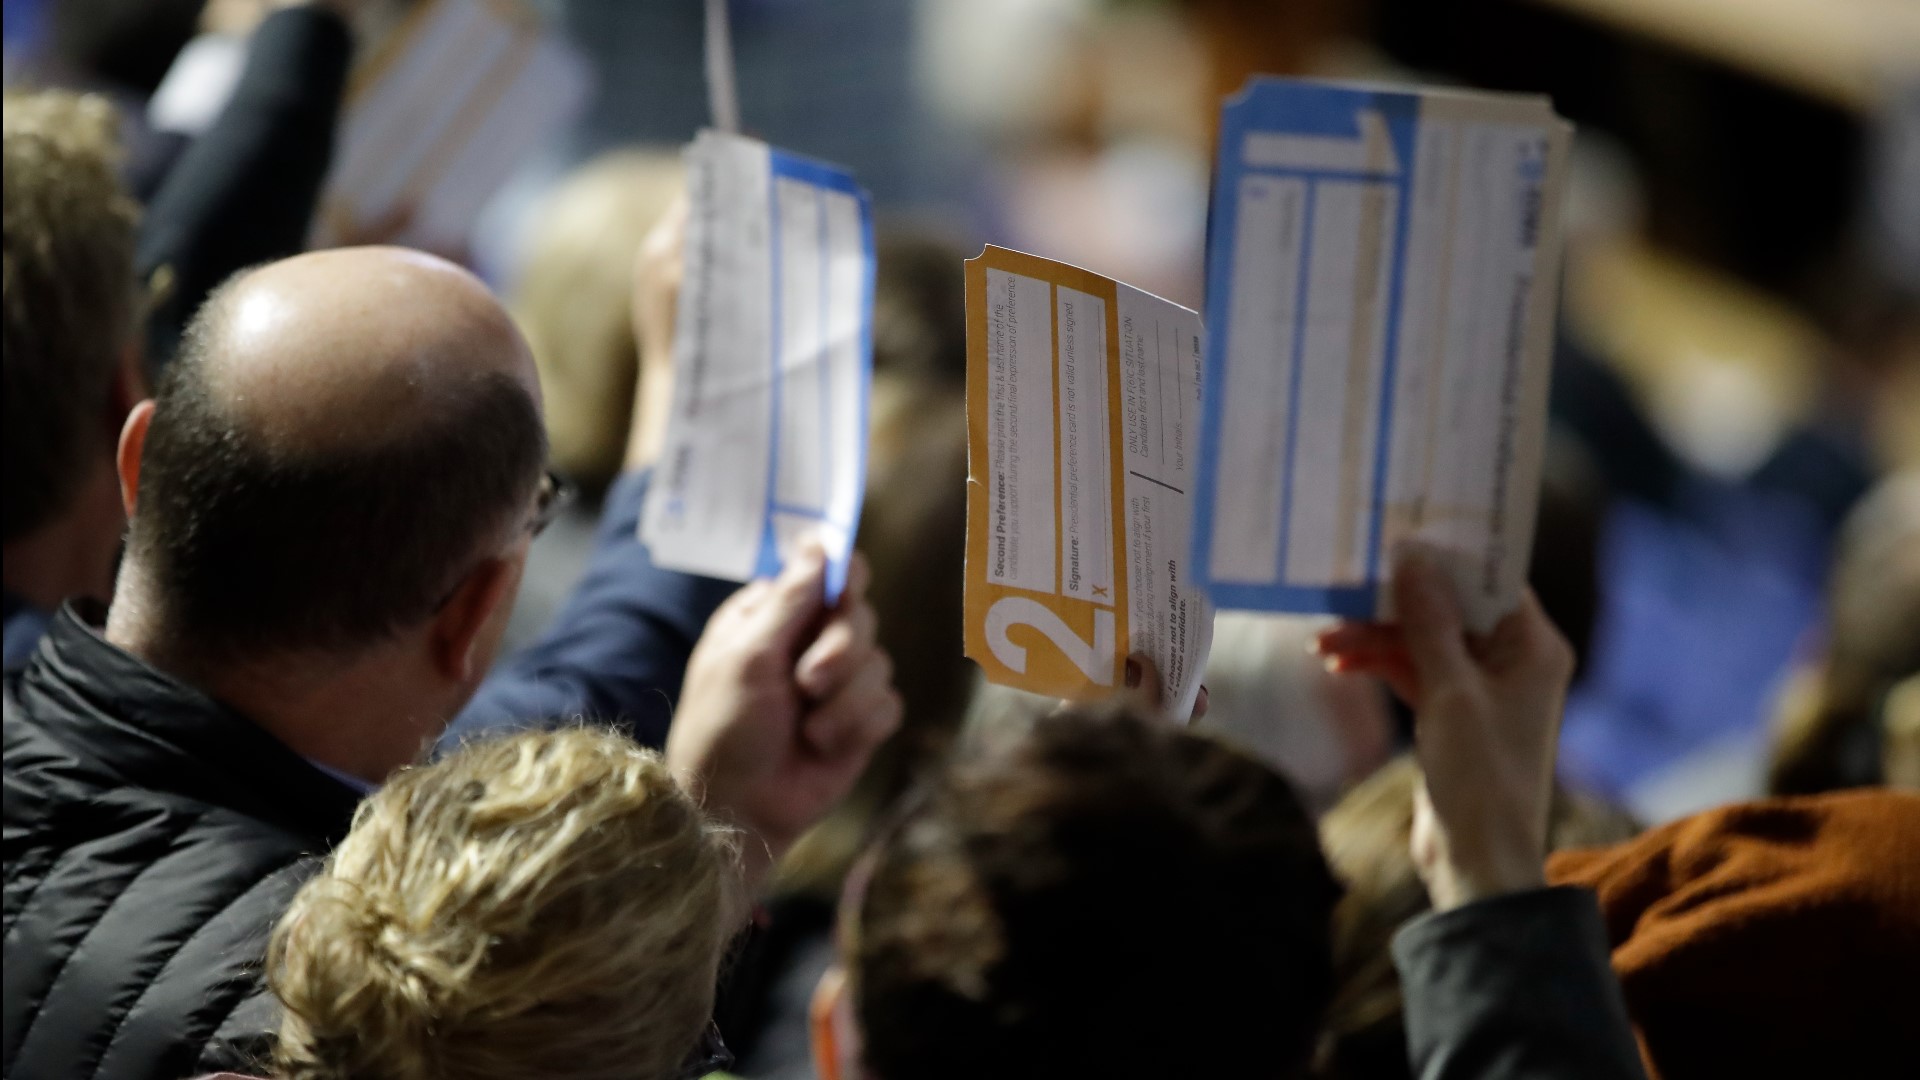 Voters would be able to vote by mail ahead of caucus night, which would be reserved strictly for party business.